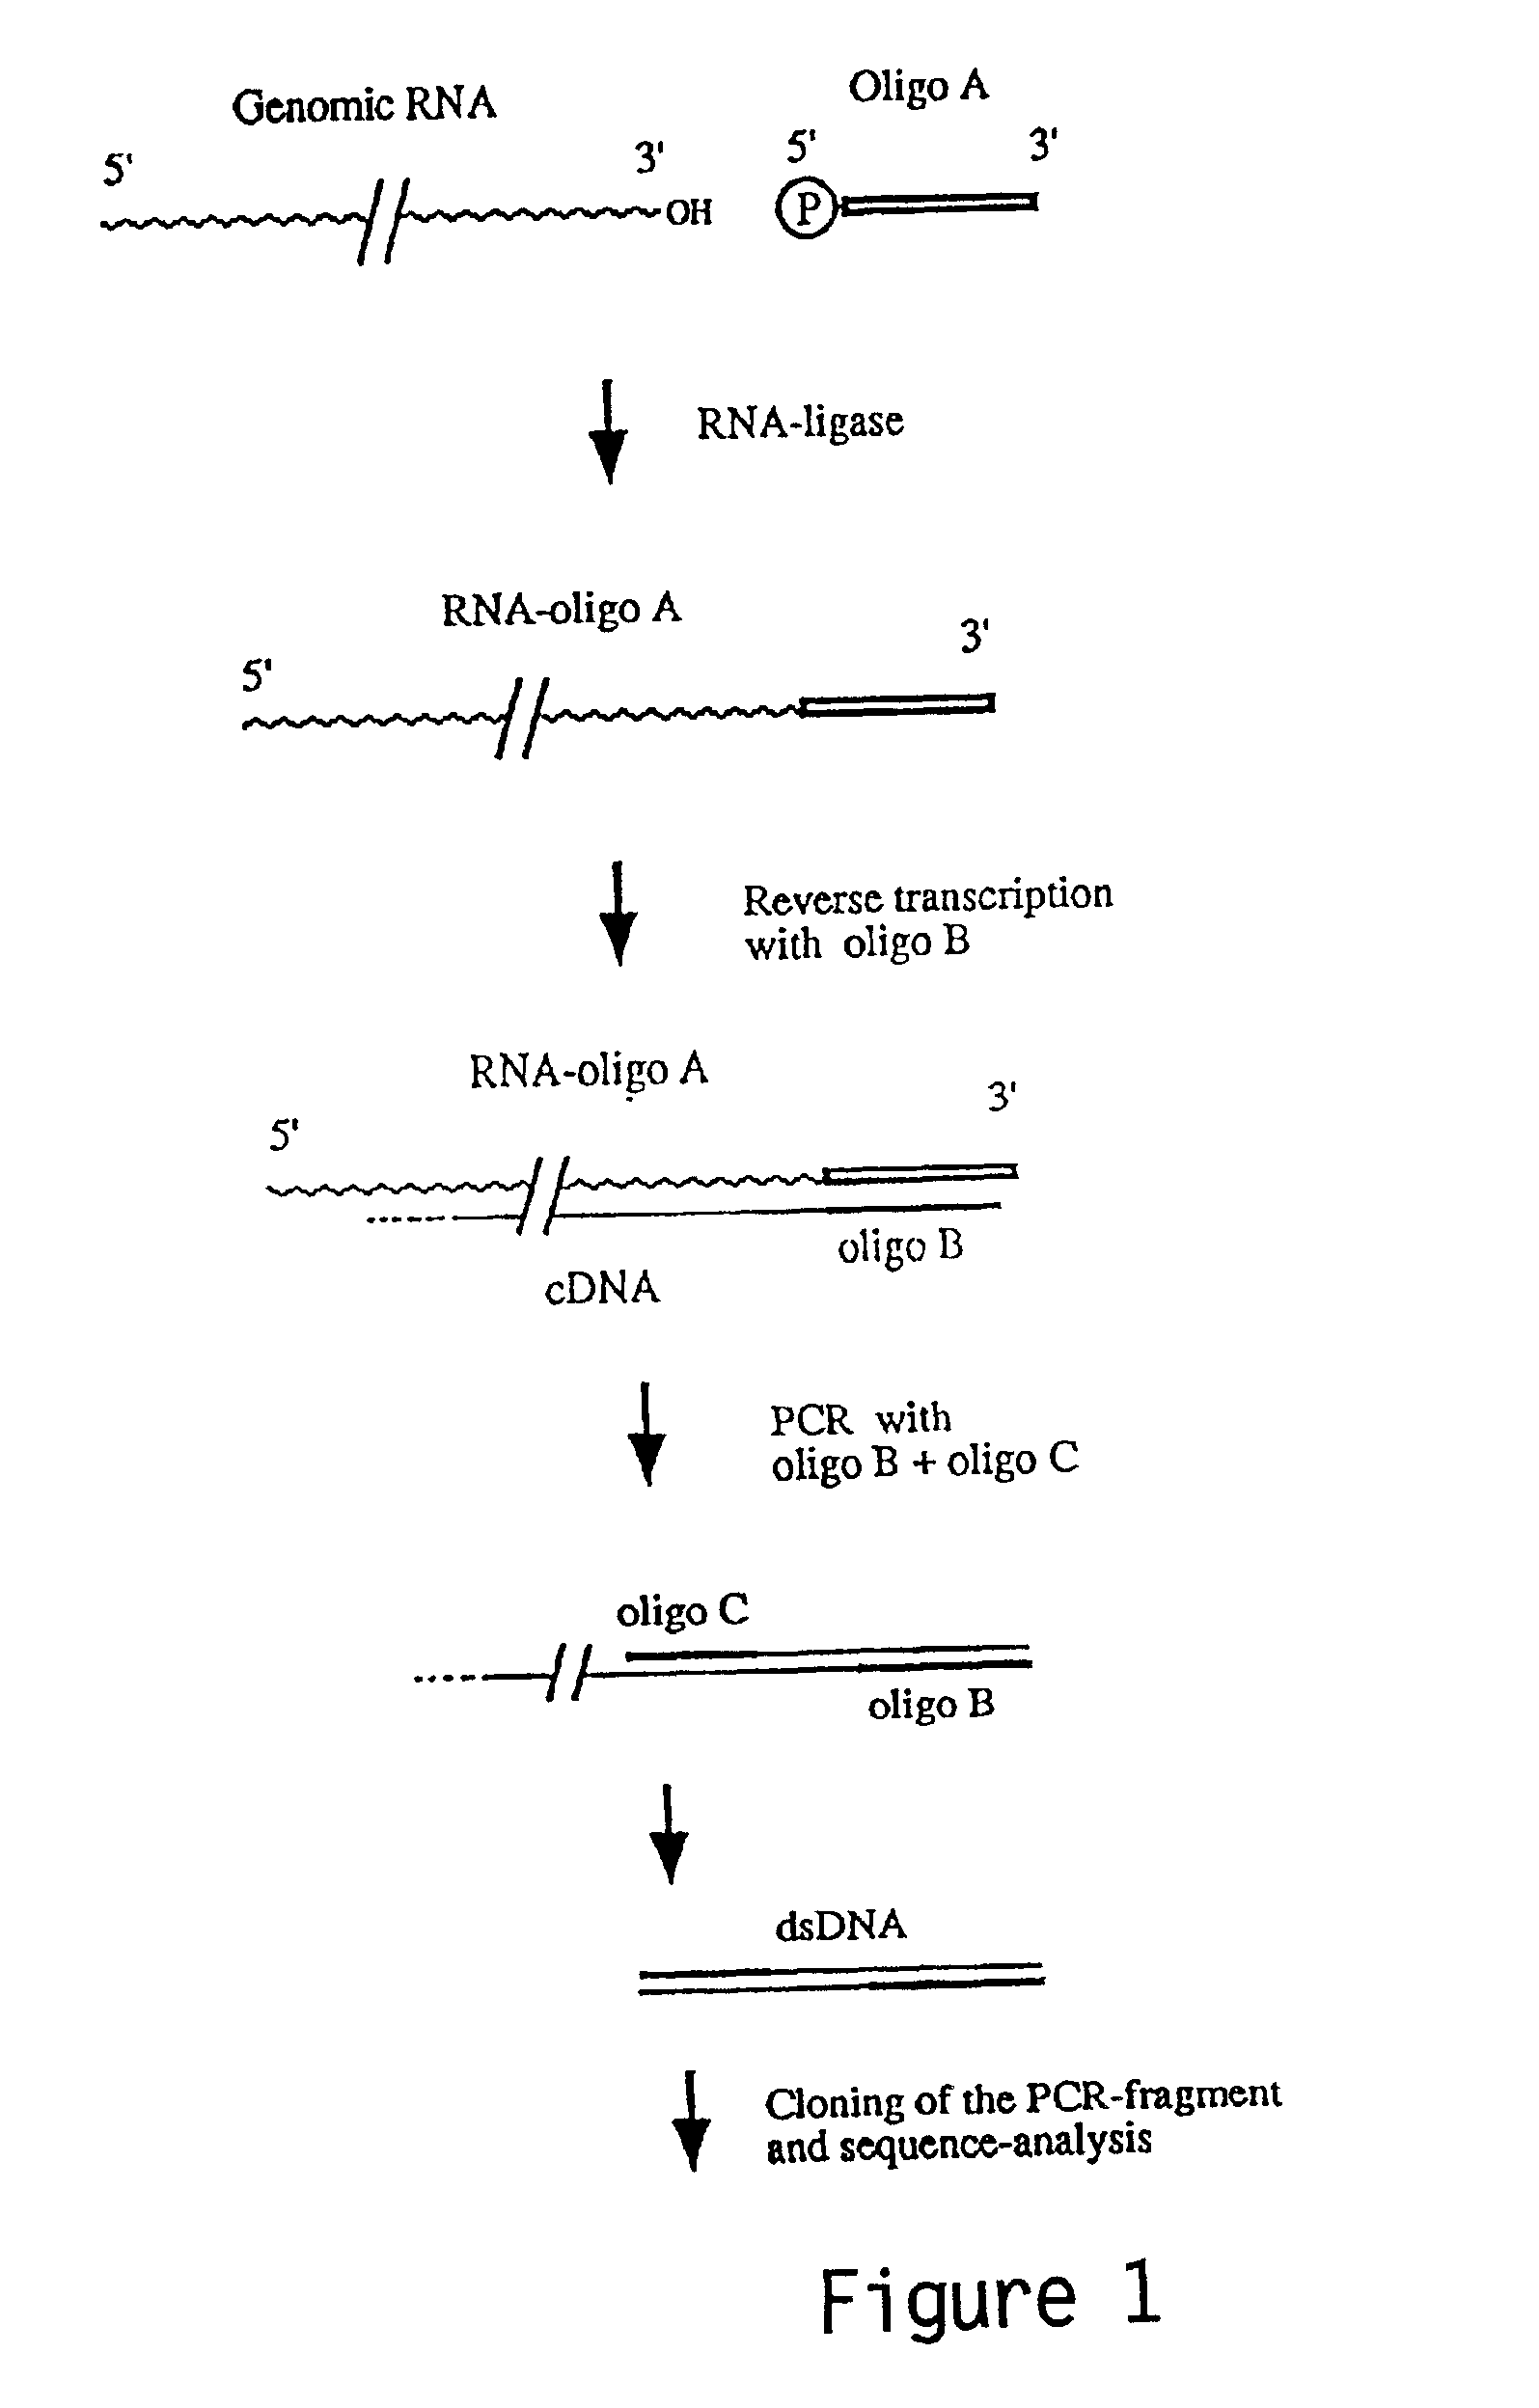 3′terminal sequence of hepatitis C virus genome and diagnostic and therapeutic uses thereof